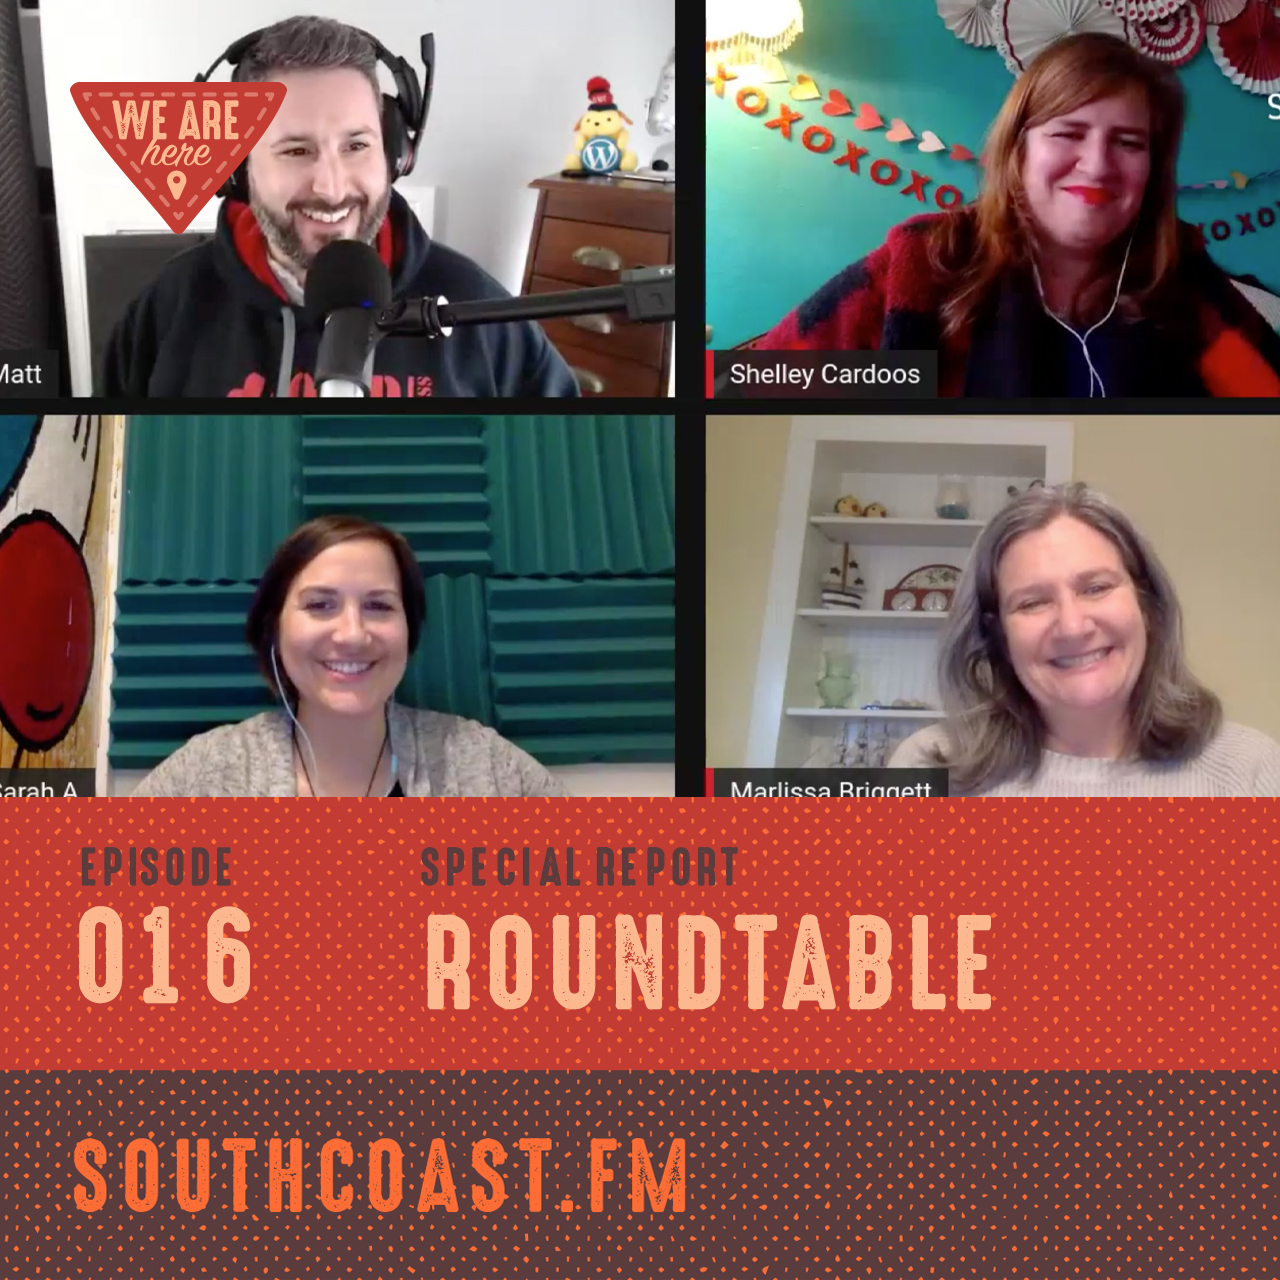 Roundtable discussion: Dealing with COVID-19